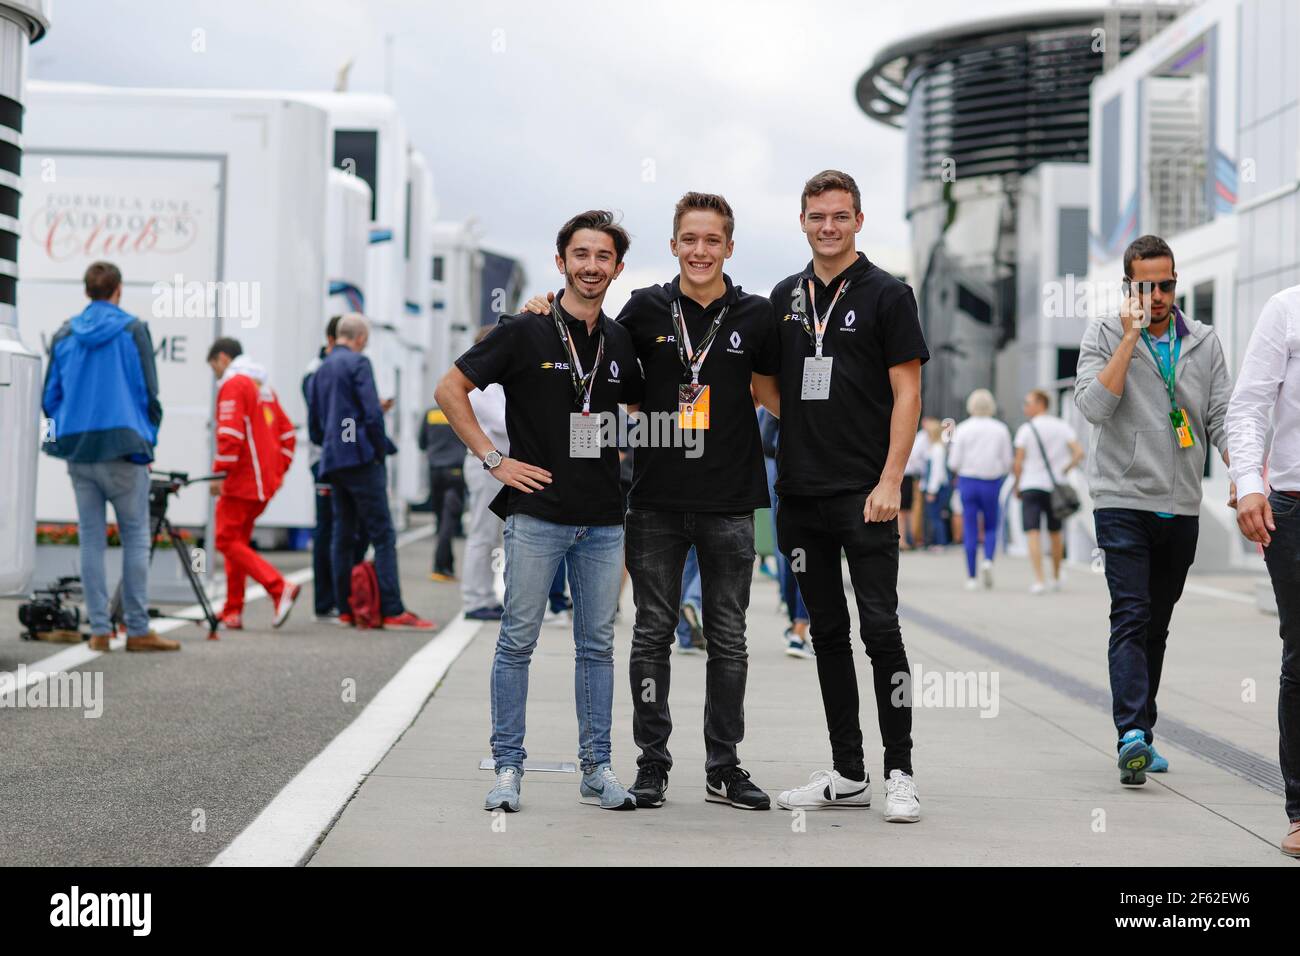 PALMER Will (gbr) Renault FR 2.0L team R-ace gp ambiance portrait, FENESTRAZ Sacha (fra) Renault FR 2.0L team Josef Kaufmann racing ambiance portrait, AUBRY Gabriel (fra) Renault FR 2.0L team Tech 1 racing ambiance portrait, during the 2017 Formula One World Championship, Grand Prix of Hungary from July 28 to 30, Hungaroring, Budapest - Photo Frederic Le Floc'h / DPPI Stock Photo